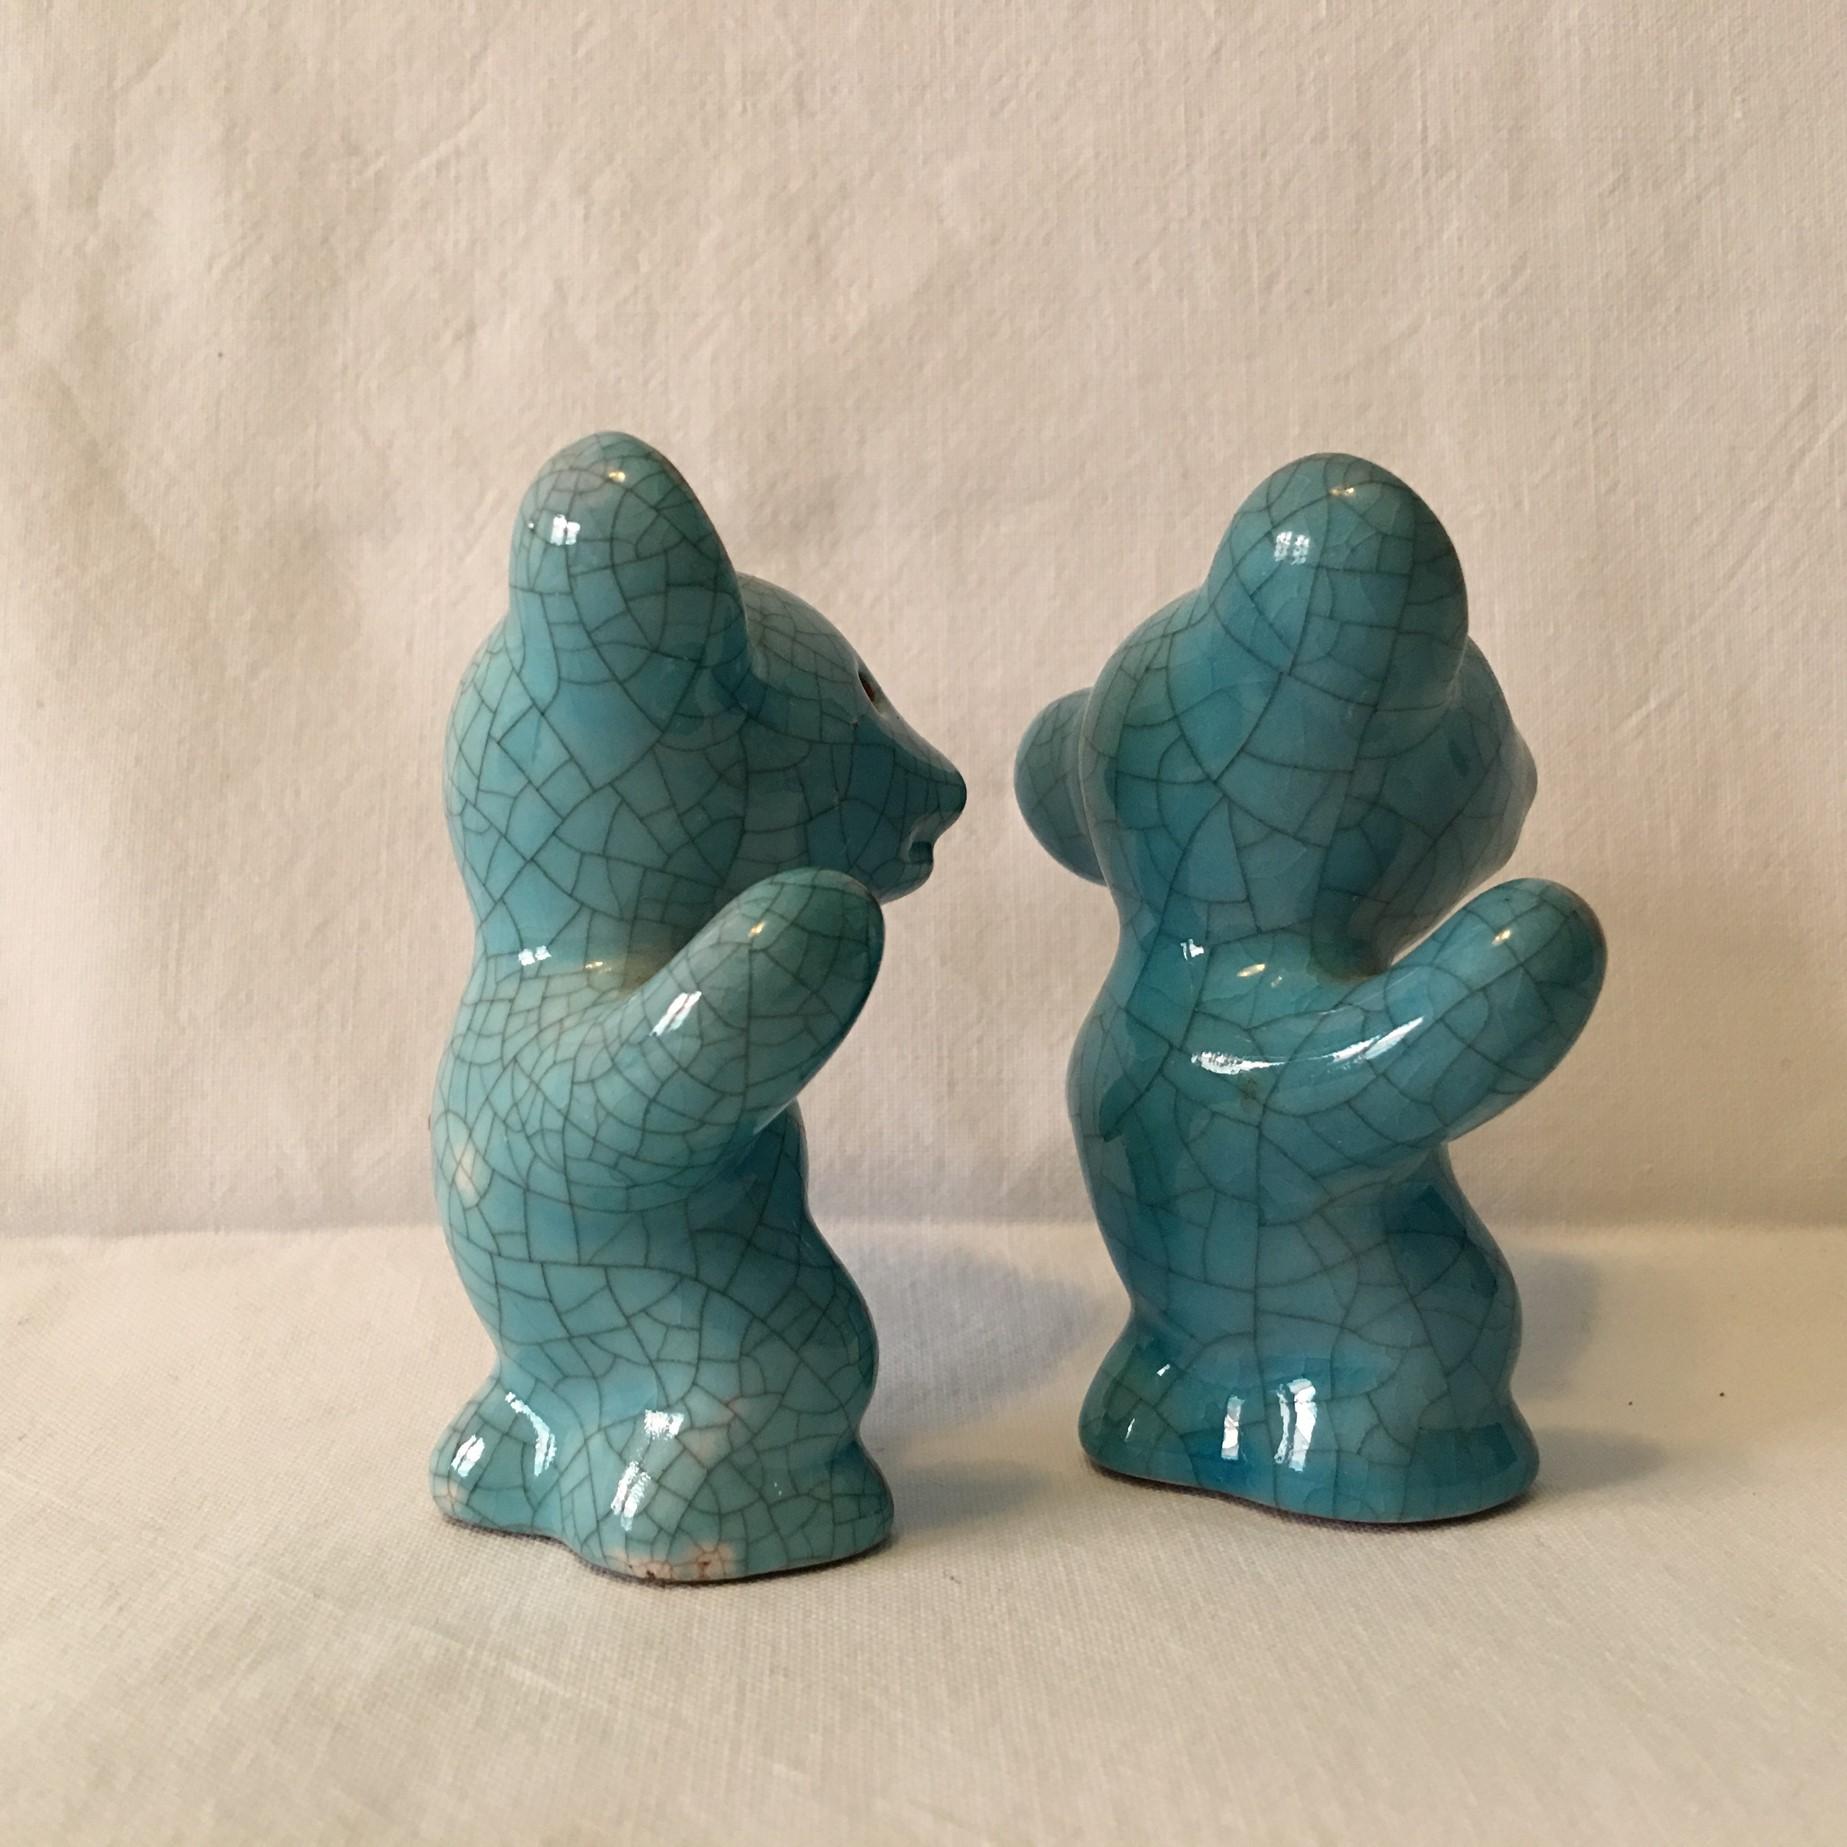 Two lovely ceramic bears designed by Walter Bosse for Karlsruhe Majolika. With gorgeous Krakelee glazing. Many of Walter Bosse's designs during his time with Karlsruhe Majolika were animal designs.